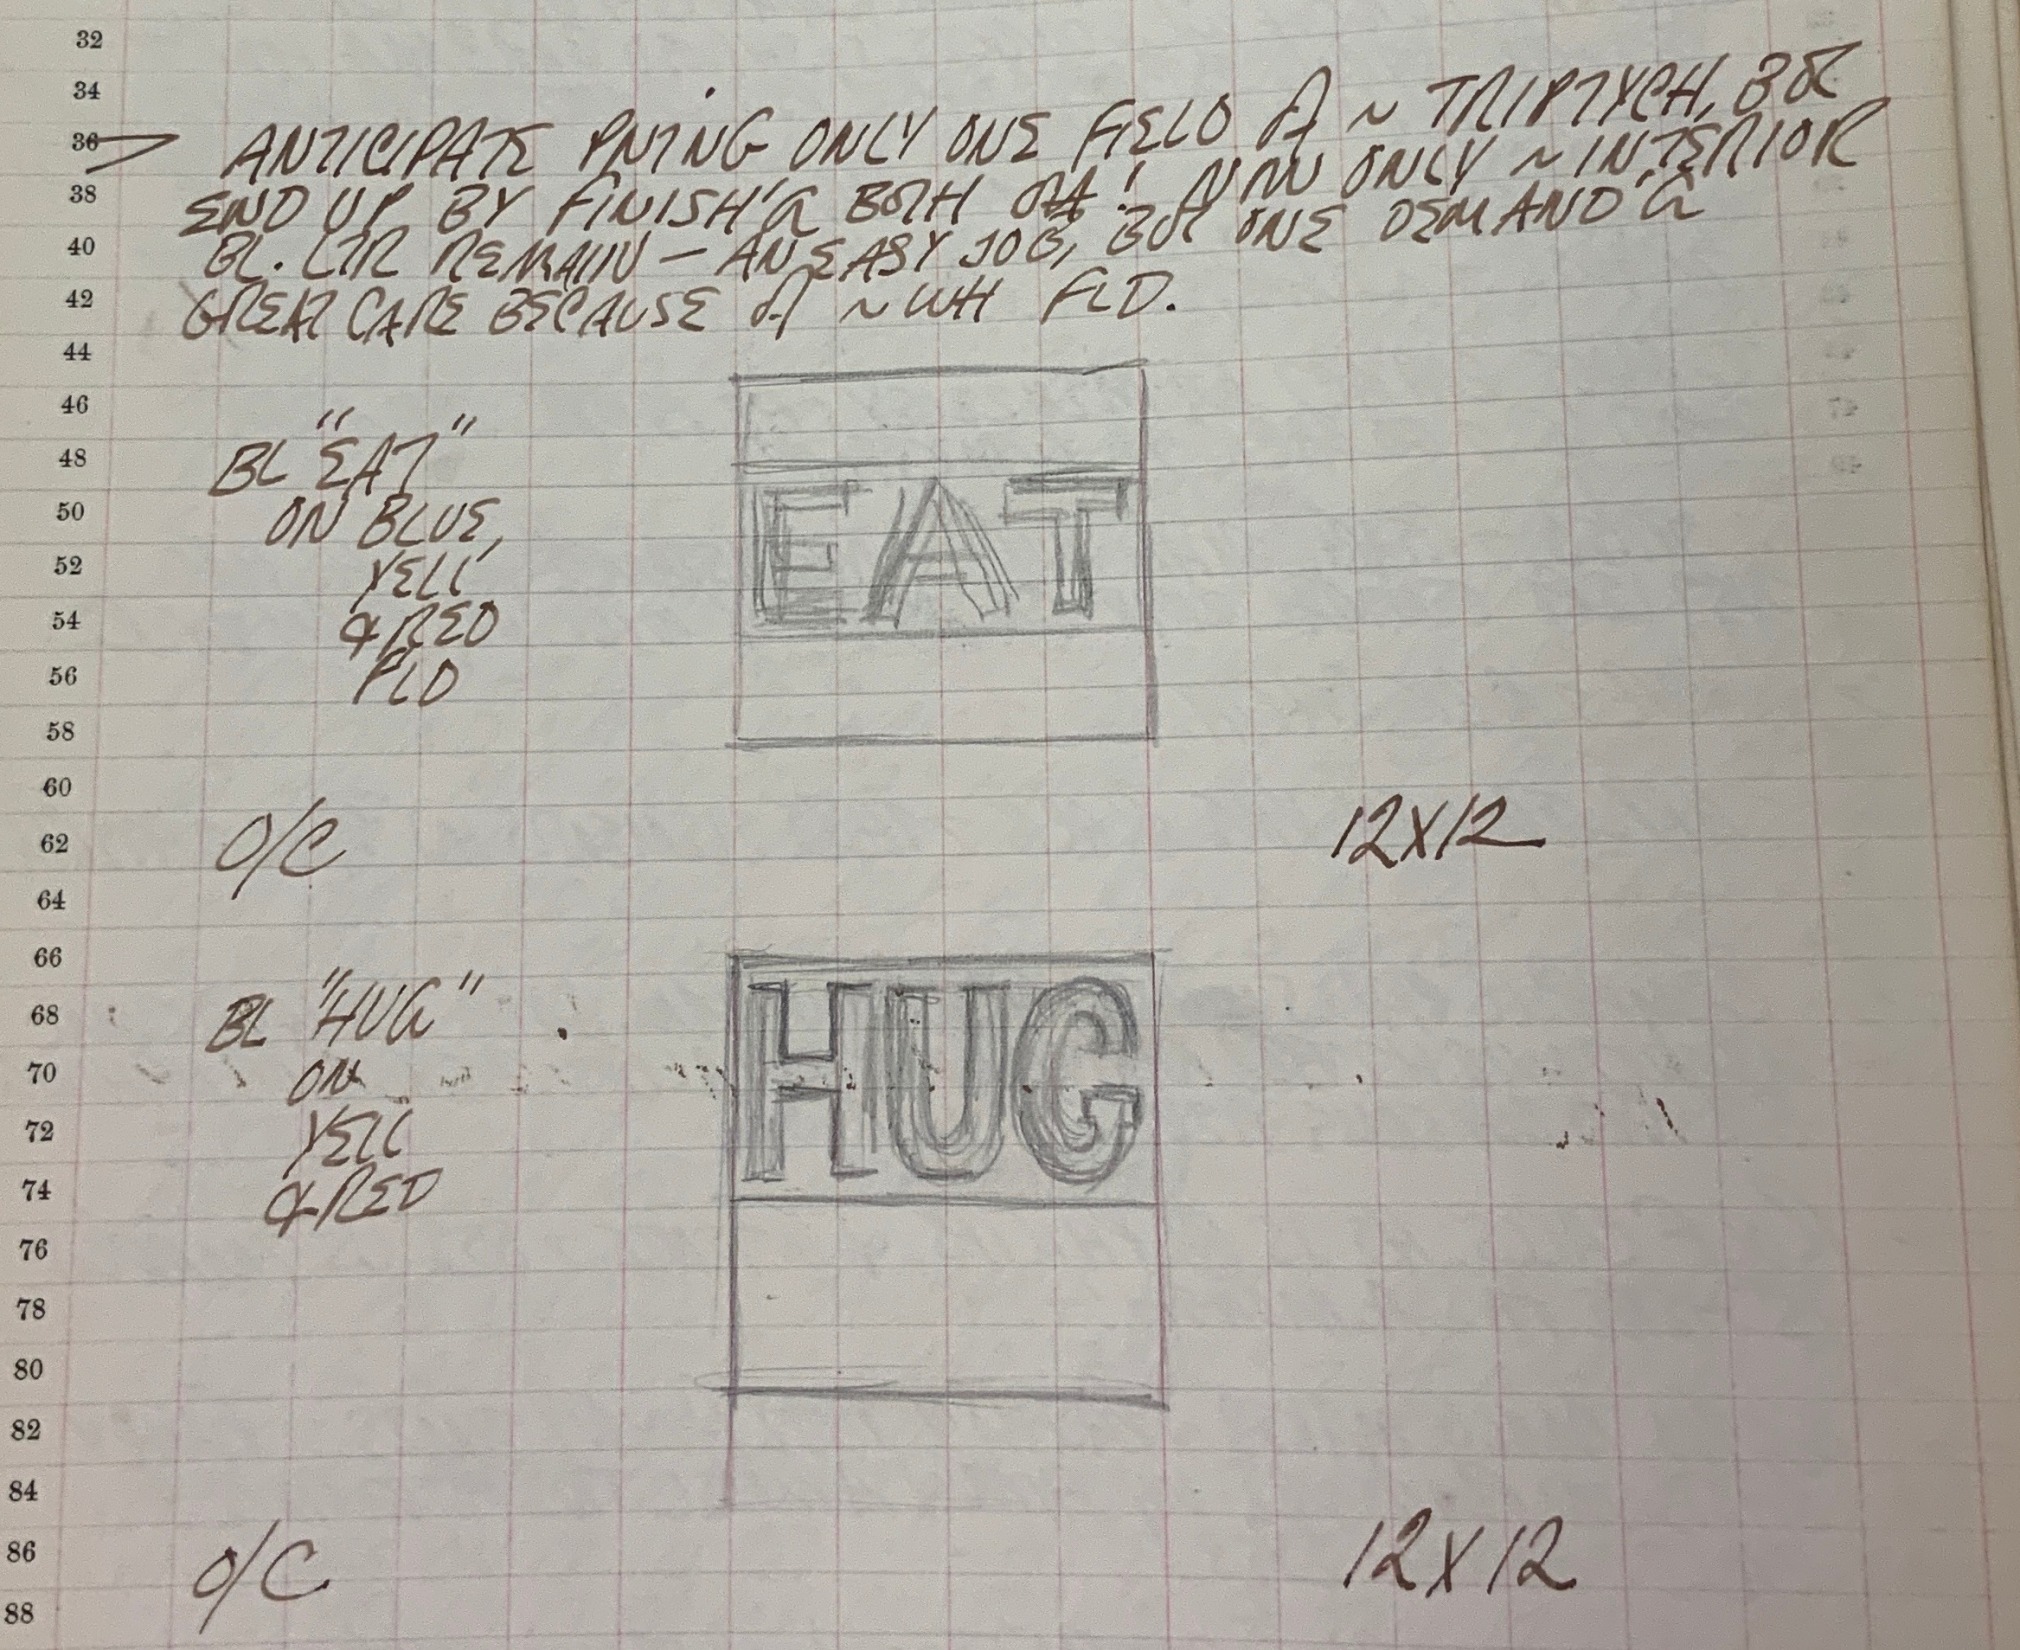 Detail from Robert Indiana's journal entry for August 19, 1962 featuring sketches of the small paintings Hug and Eat